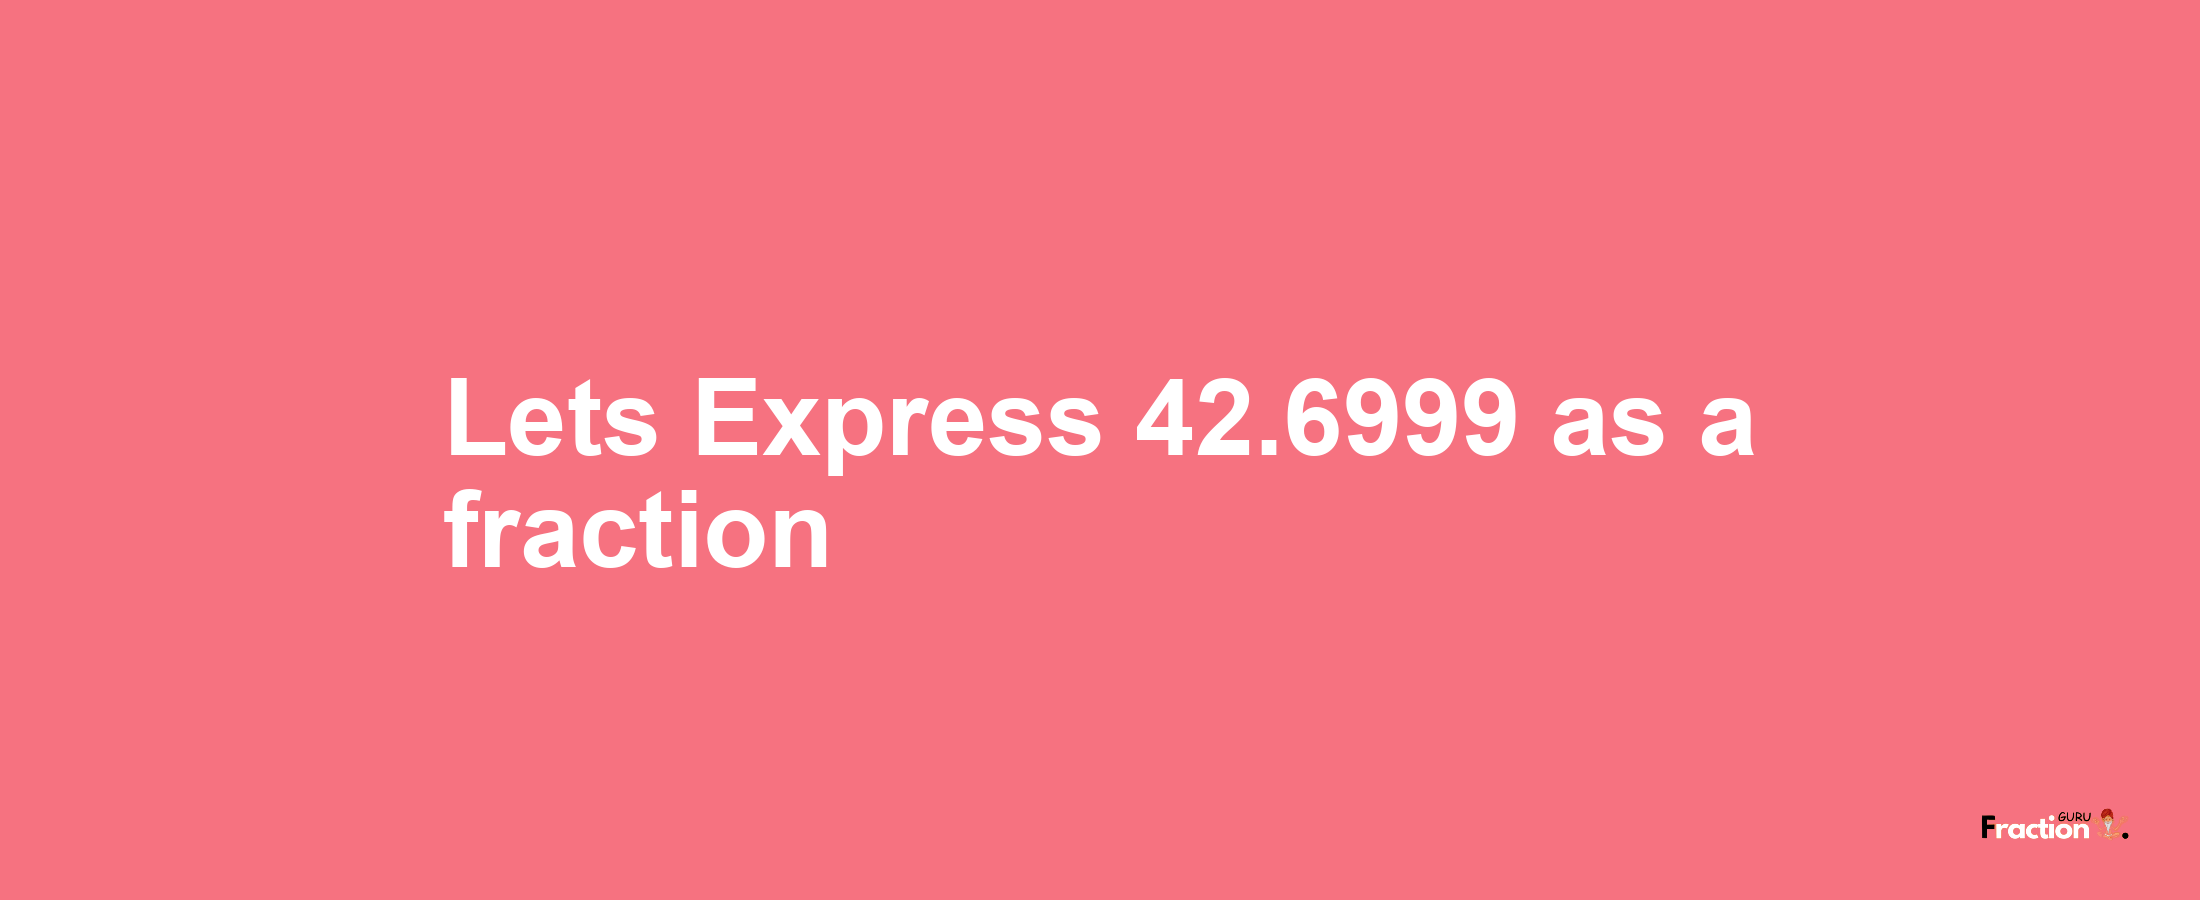 Lets Express 42.6999 as afraction